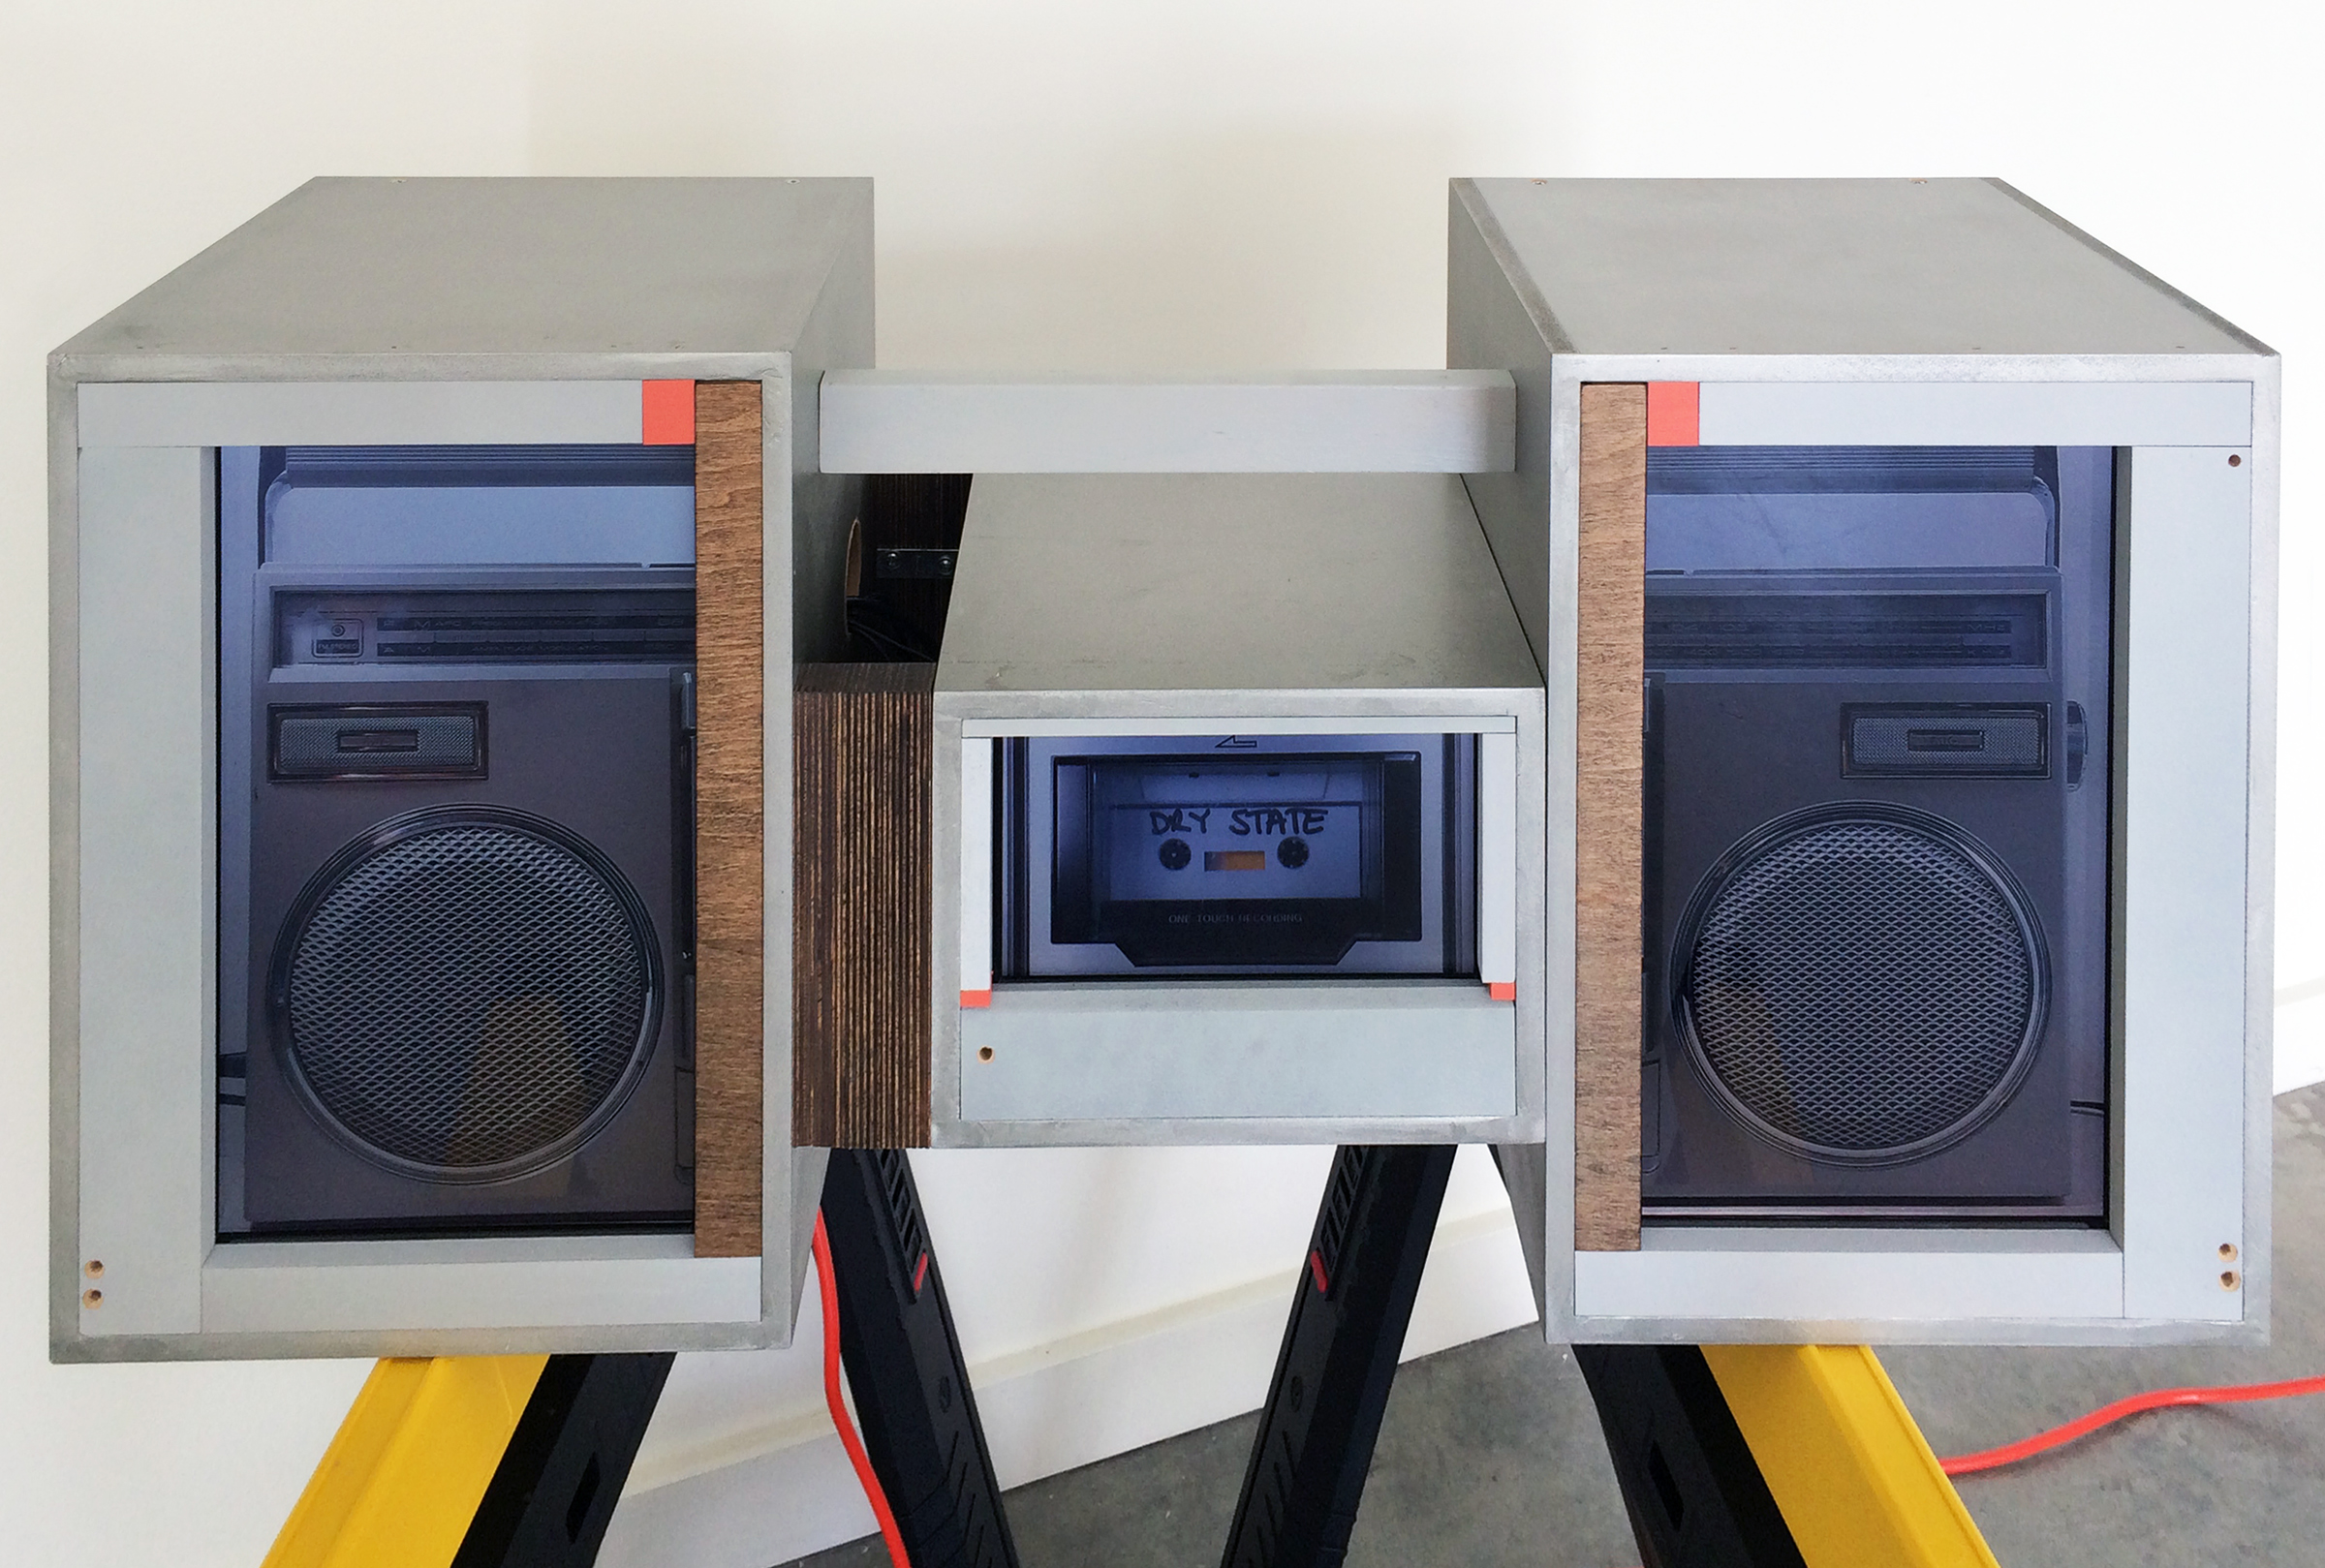   JOSHUA PIEPER   Video Boom Box , 2015, LCD monitors, dvds, speakers, wood housing and saw horses, 46.75" x 35.75" x 10" 